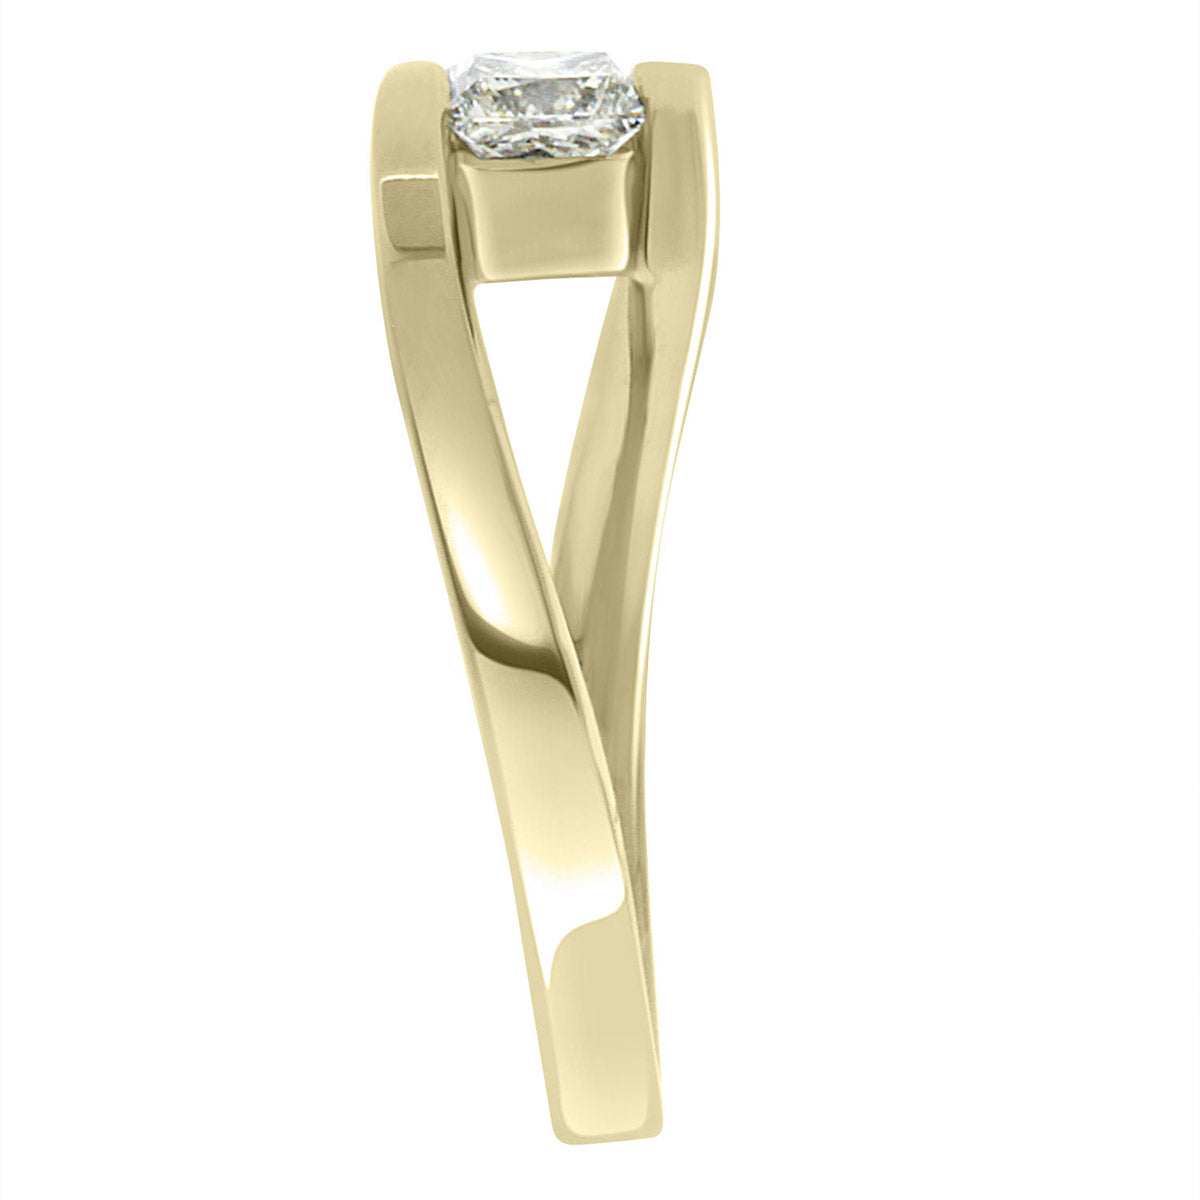 Princess Solitaire Engagement Ring made from yellow gold standing in an upright position